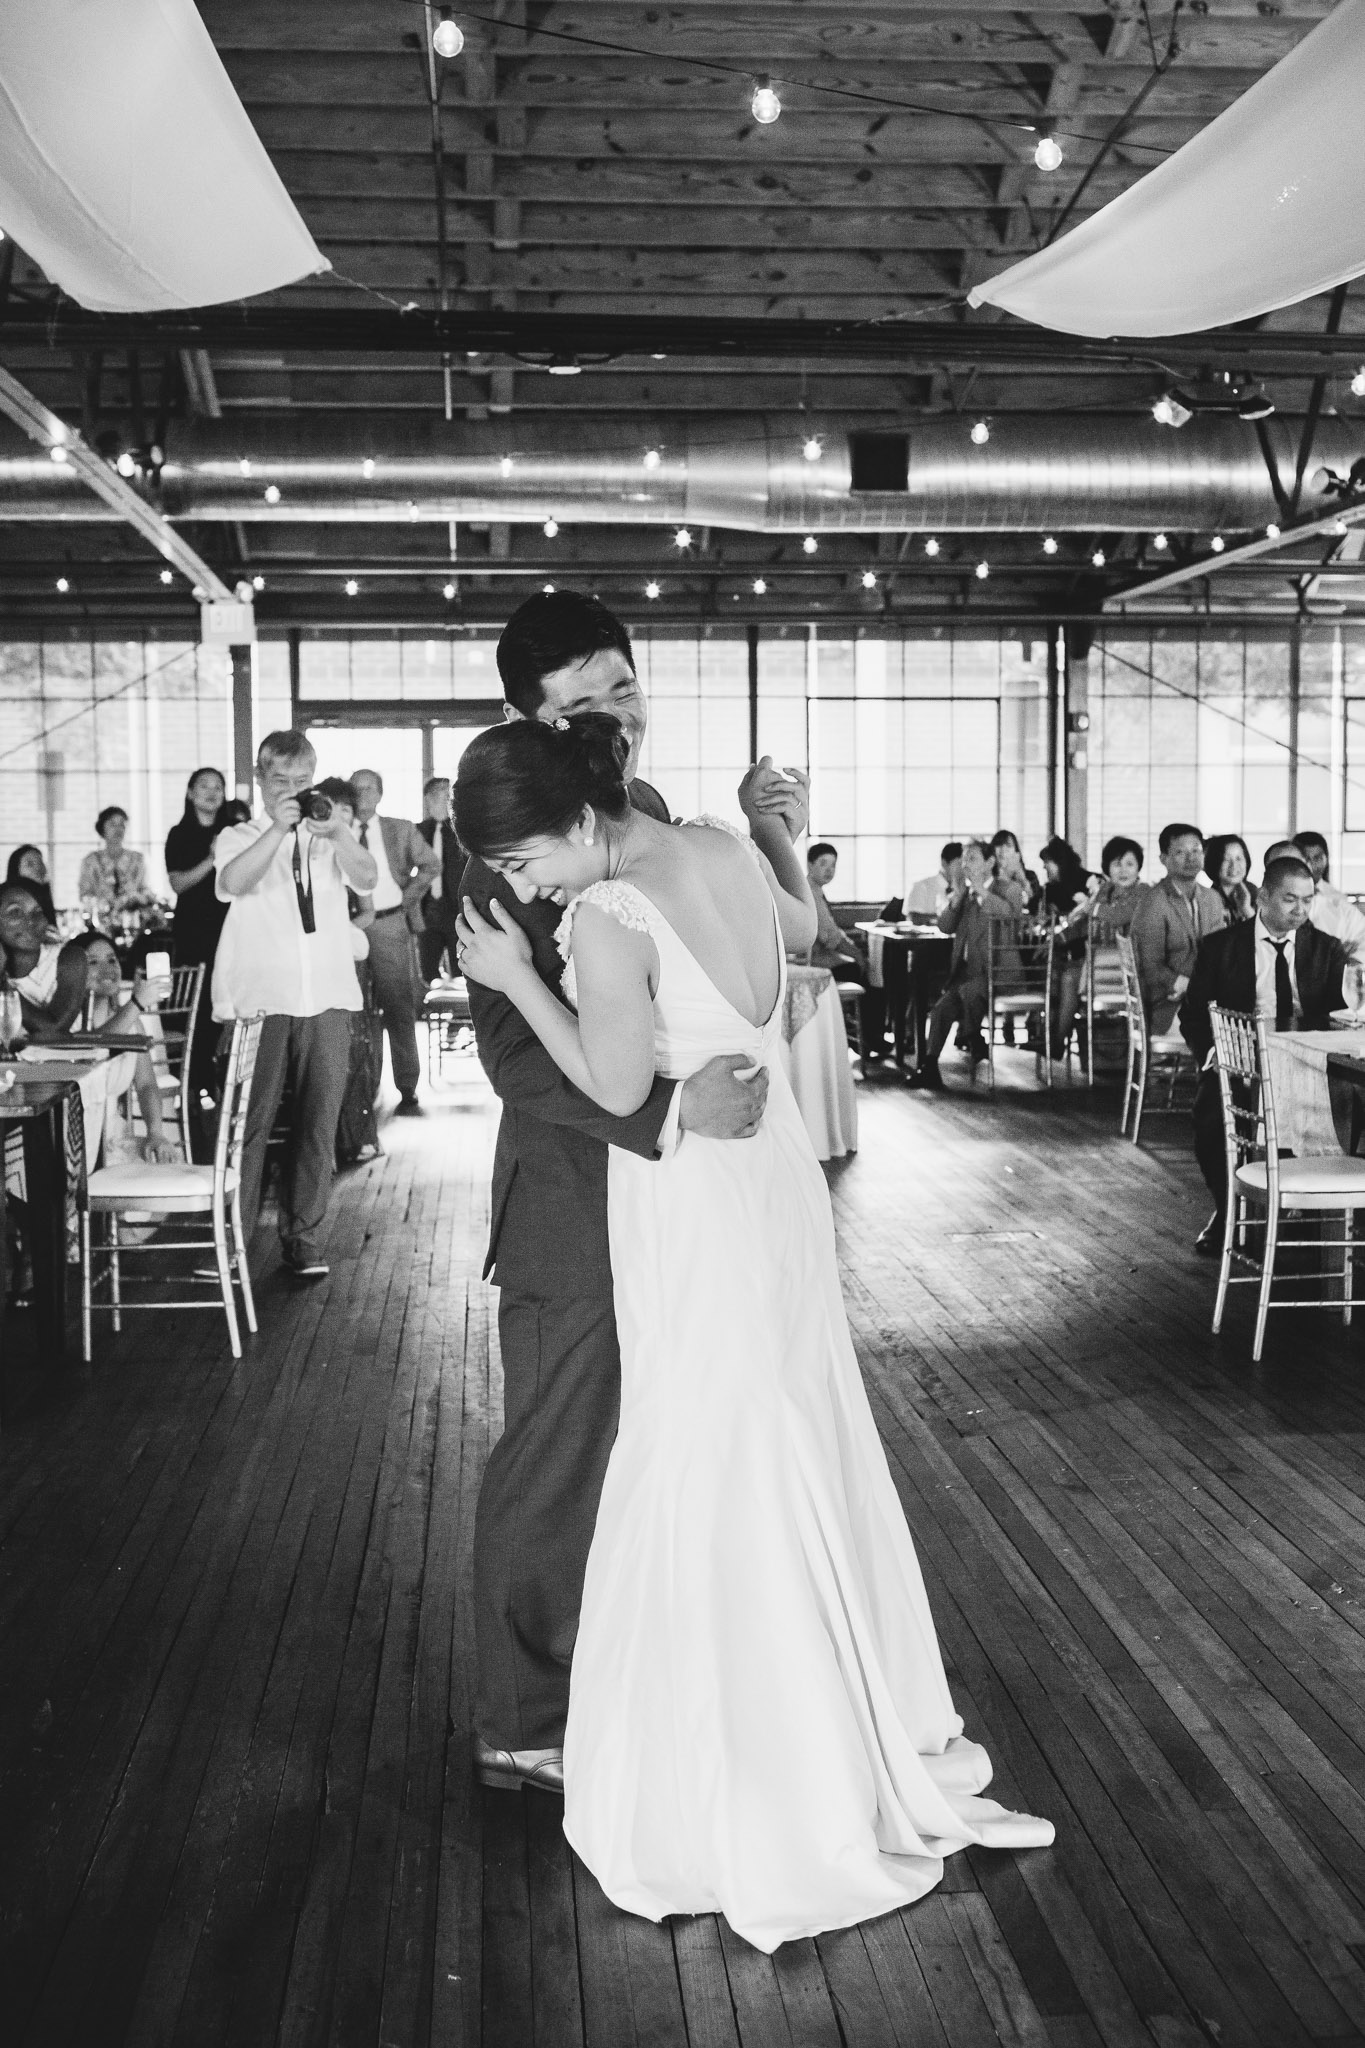 You will never forget your first dance on your wedding day, says Summerour wedding photographer Rebecca Cerasani